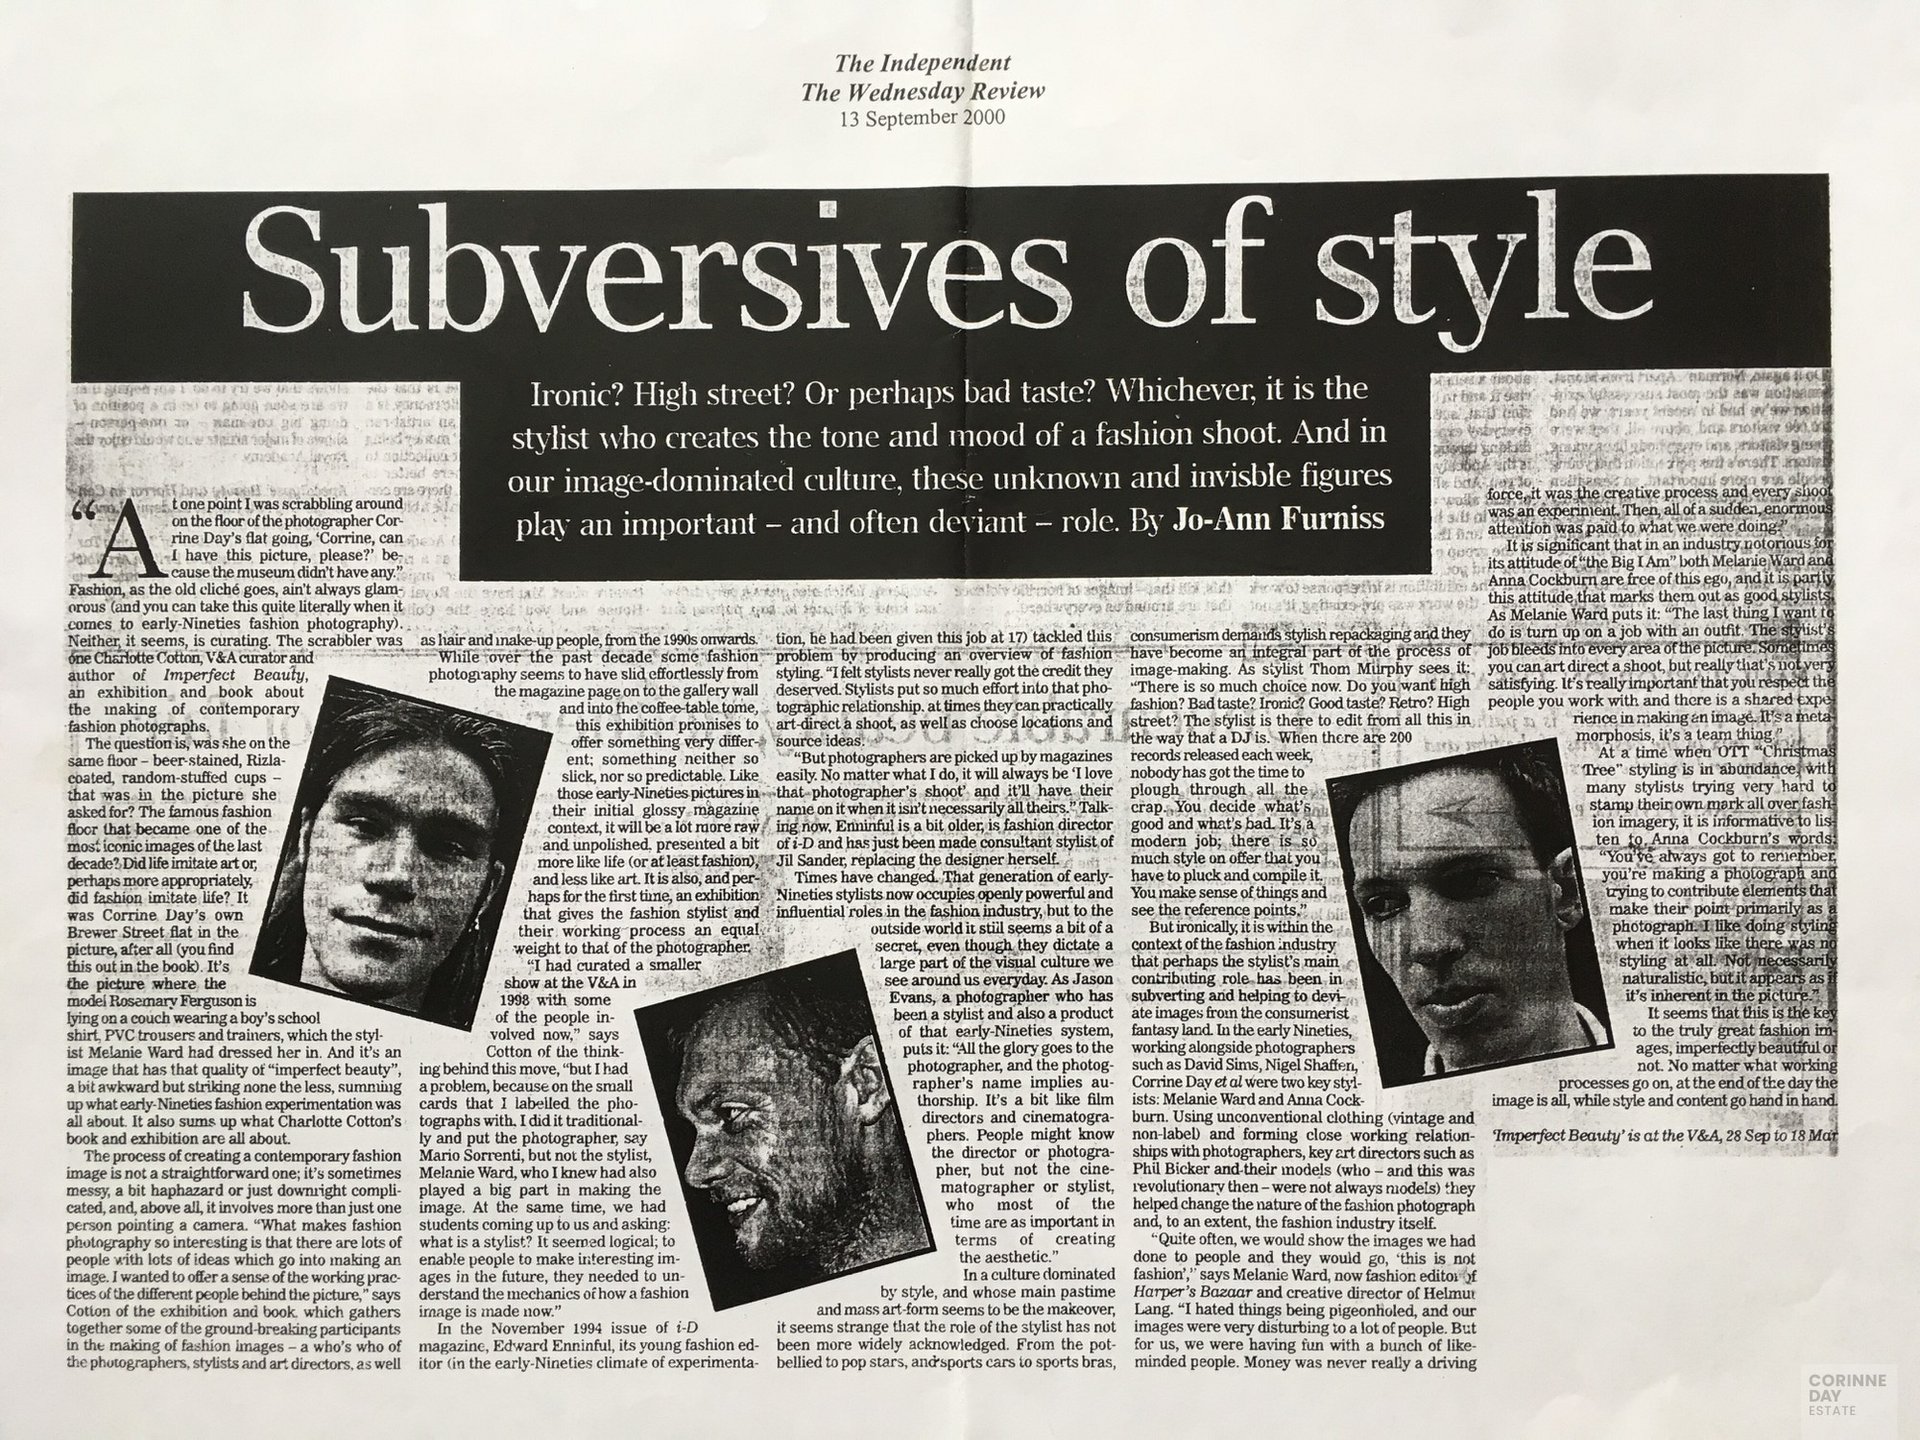 Subversions of style, The Independent, 13 Sep 2000 — Image 1 of 1